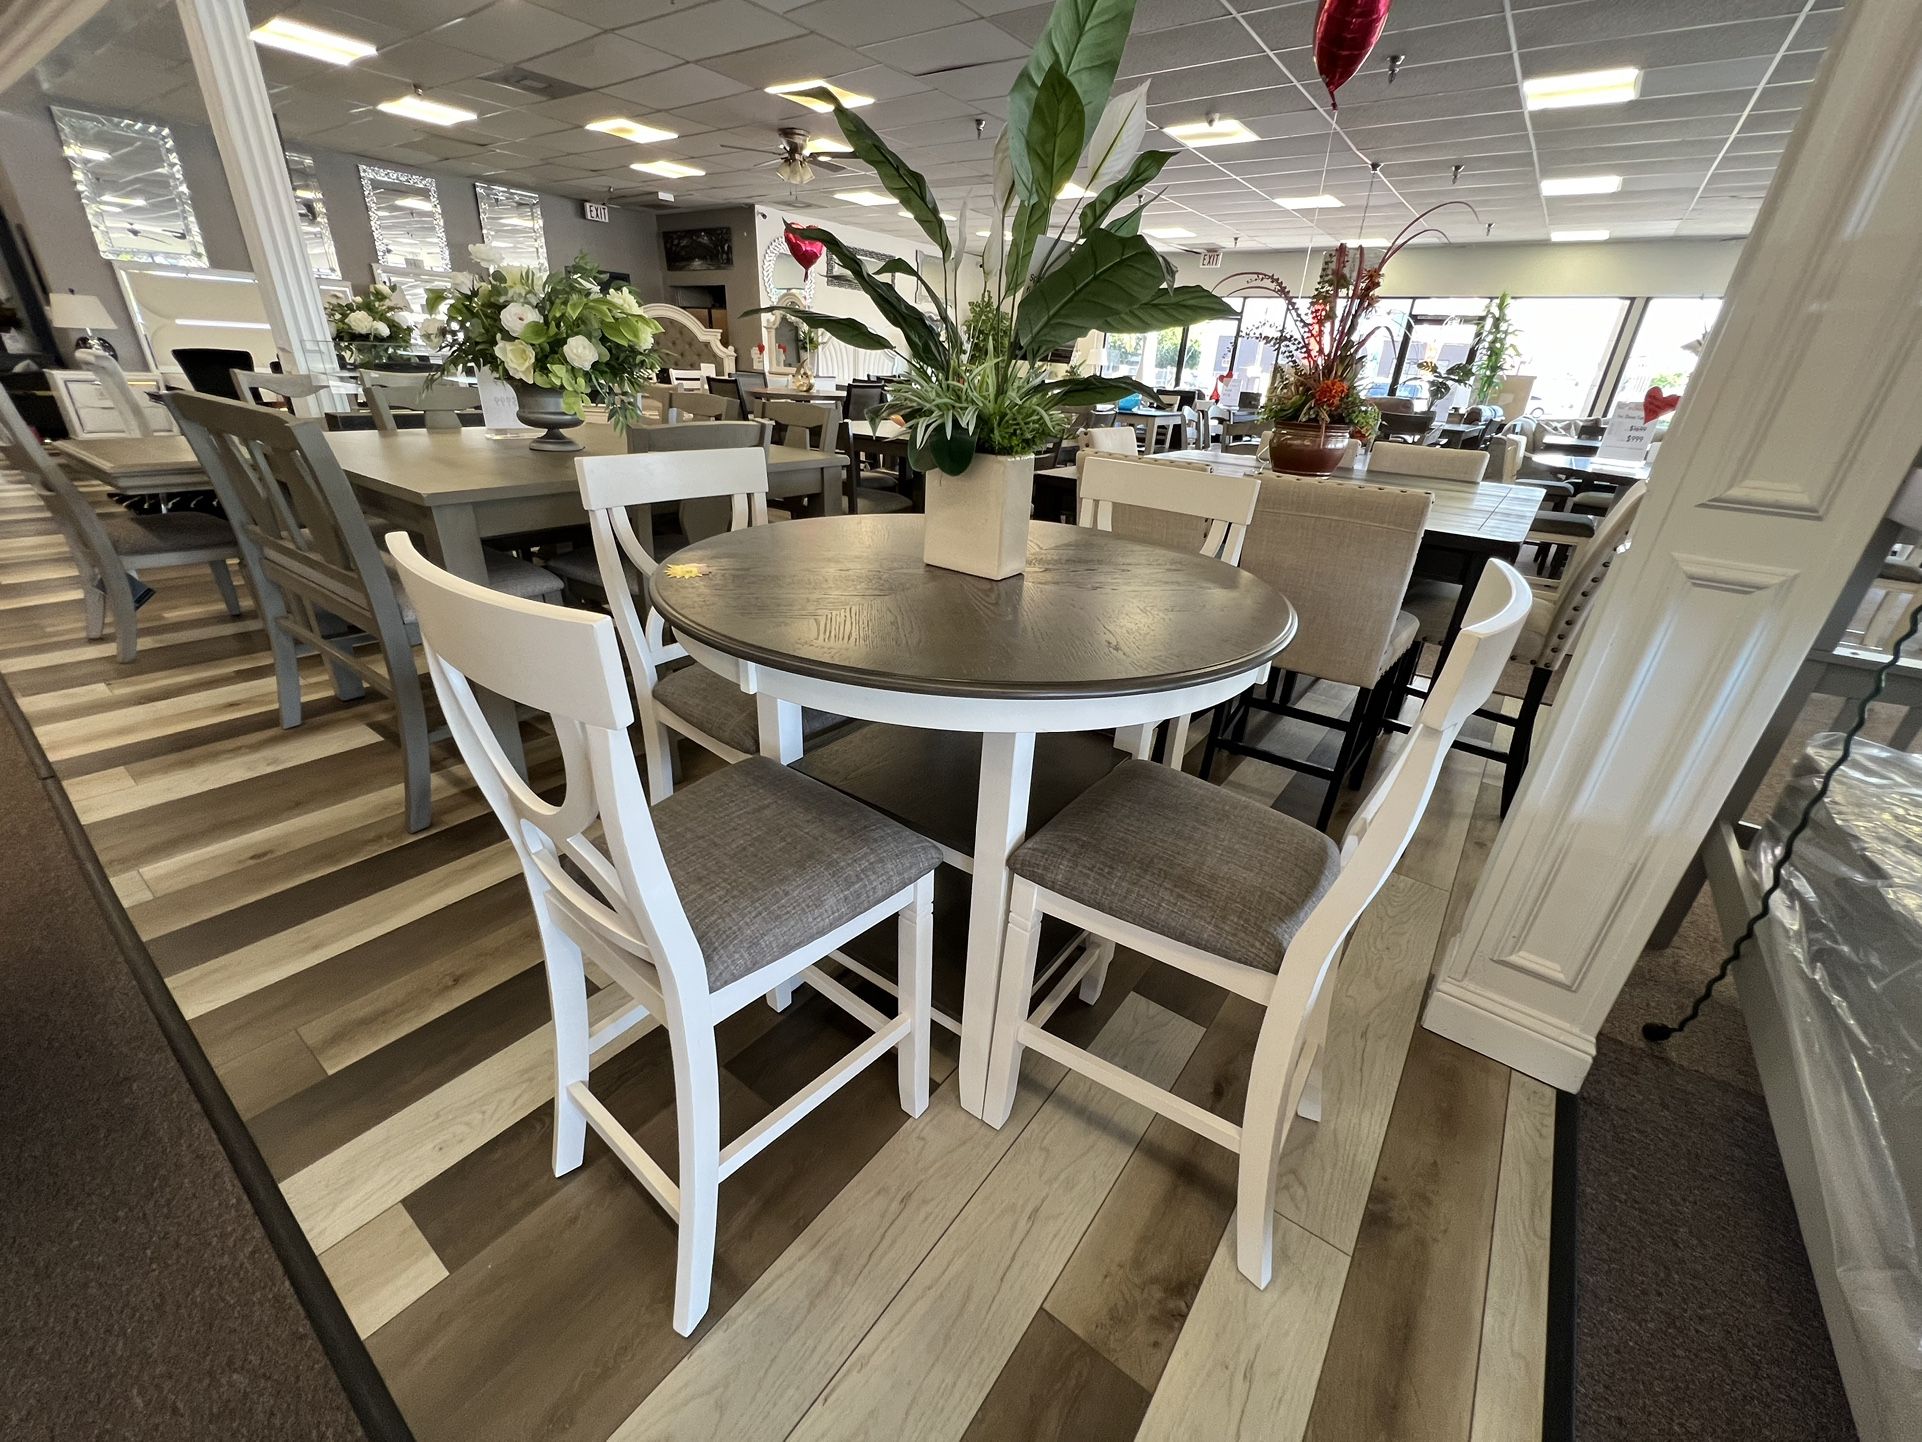 5 Pc Dining Table 🎈🎈🎈